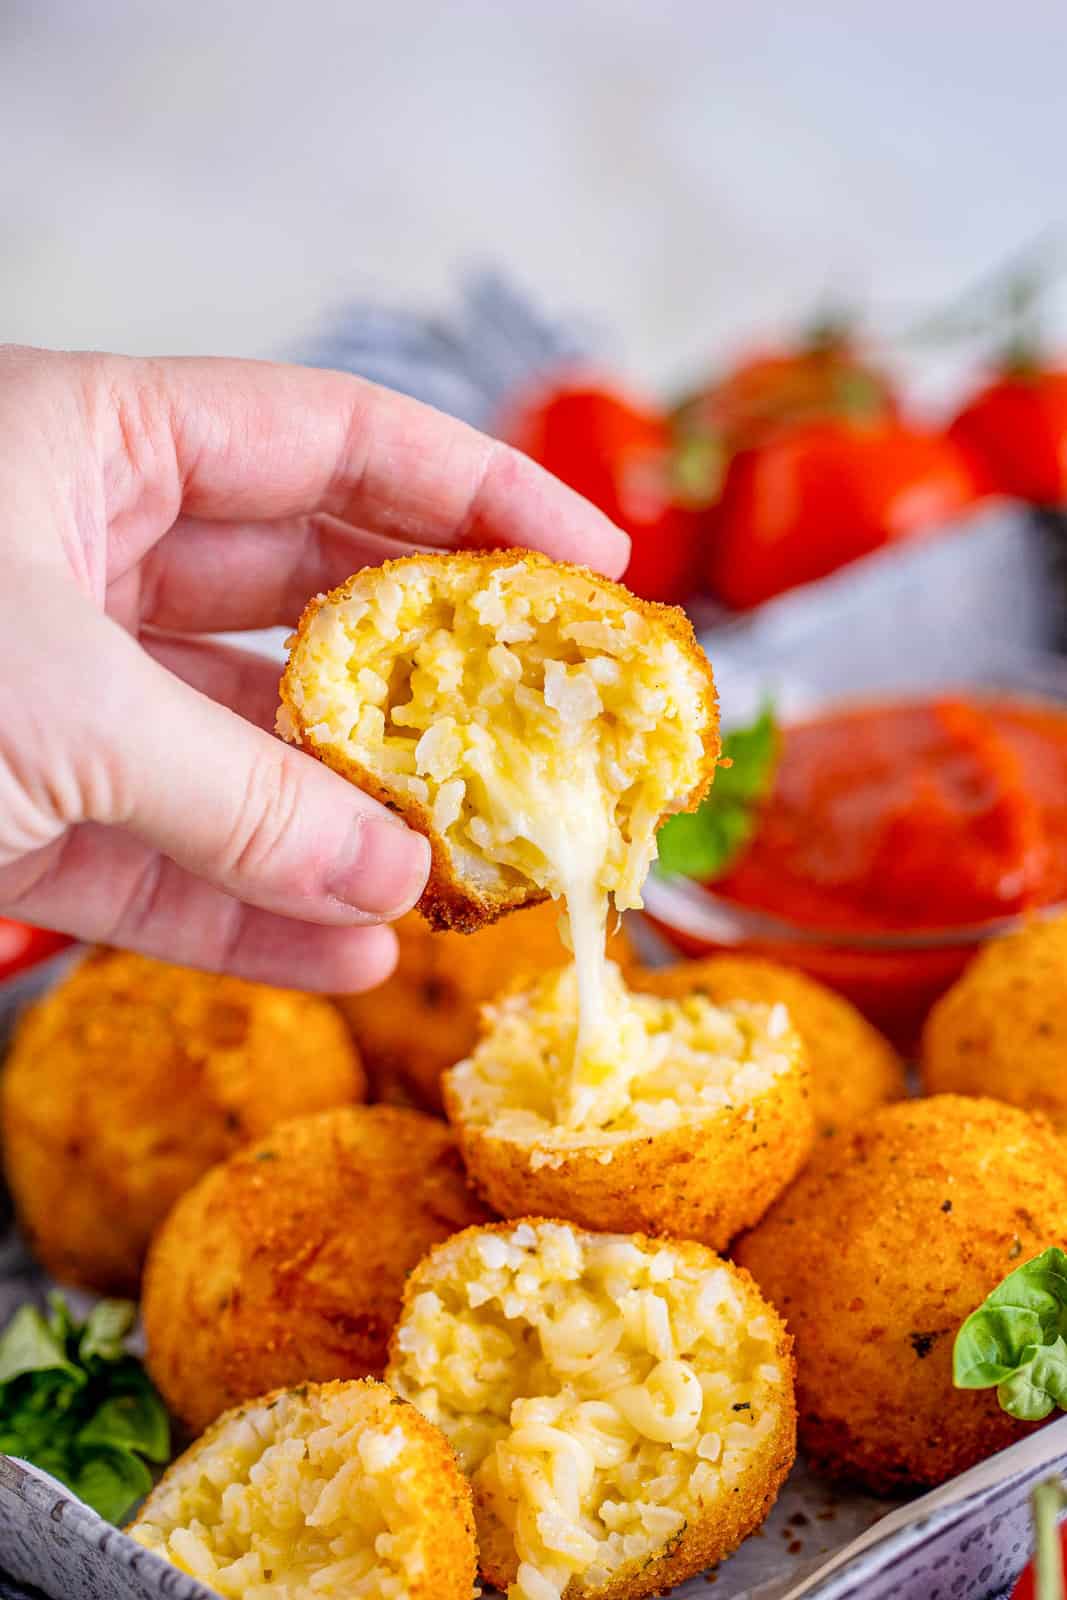 One open Arancini showing a cheese pull.